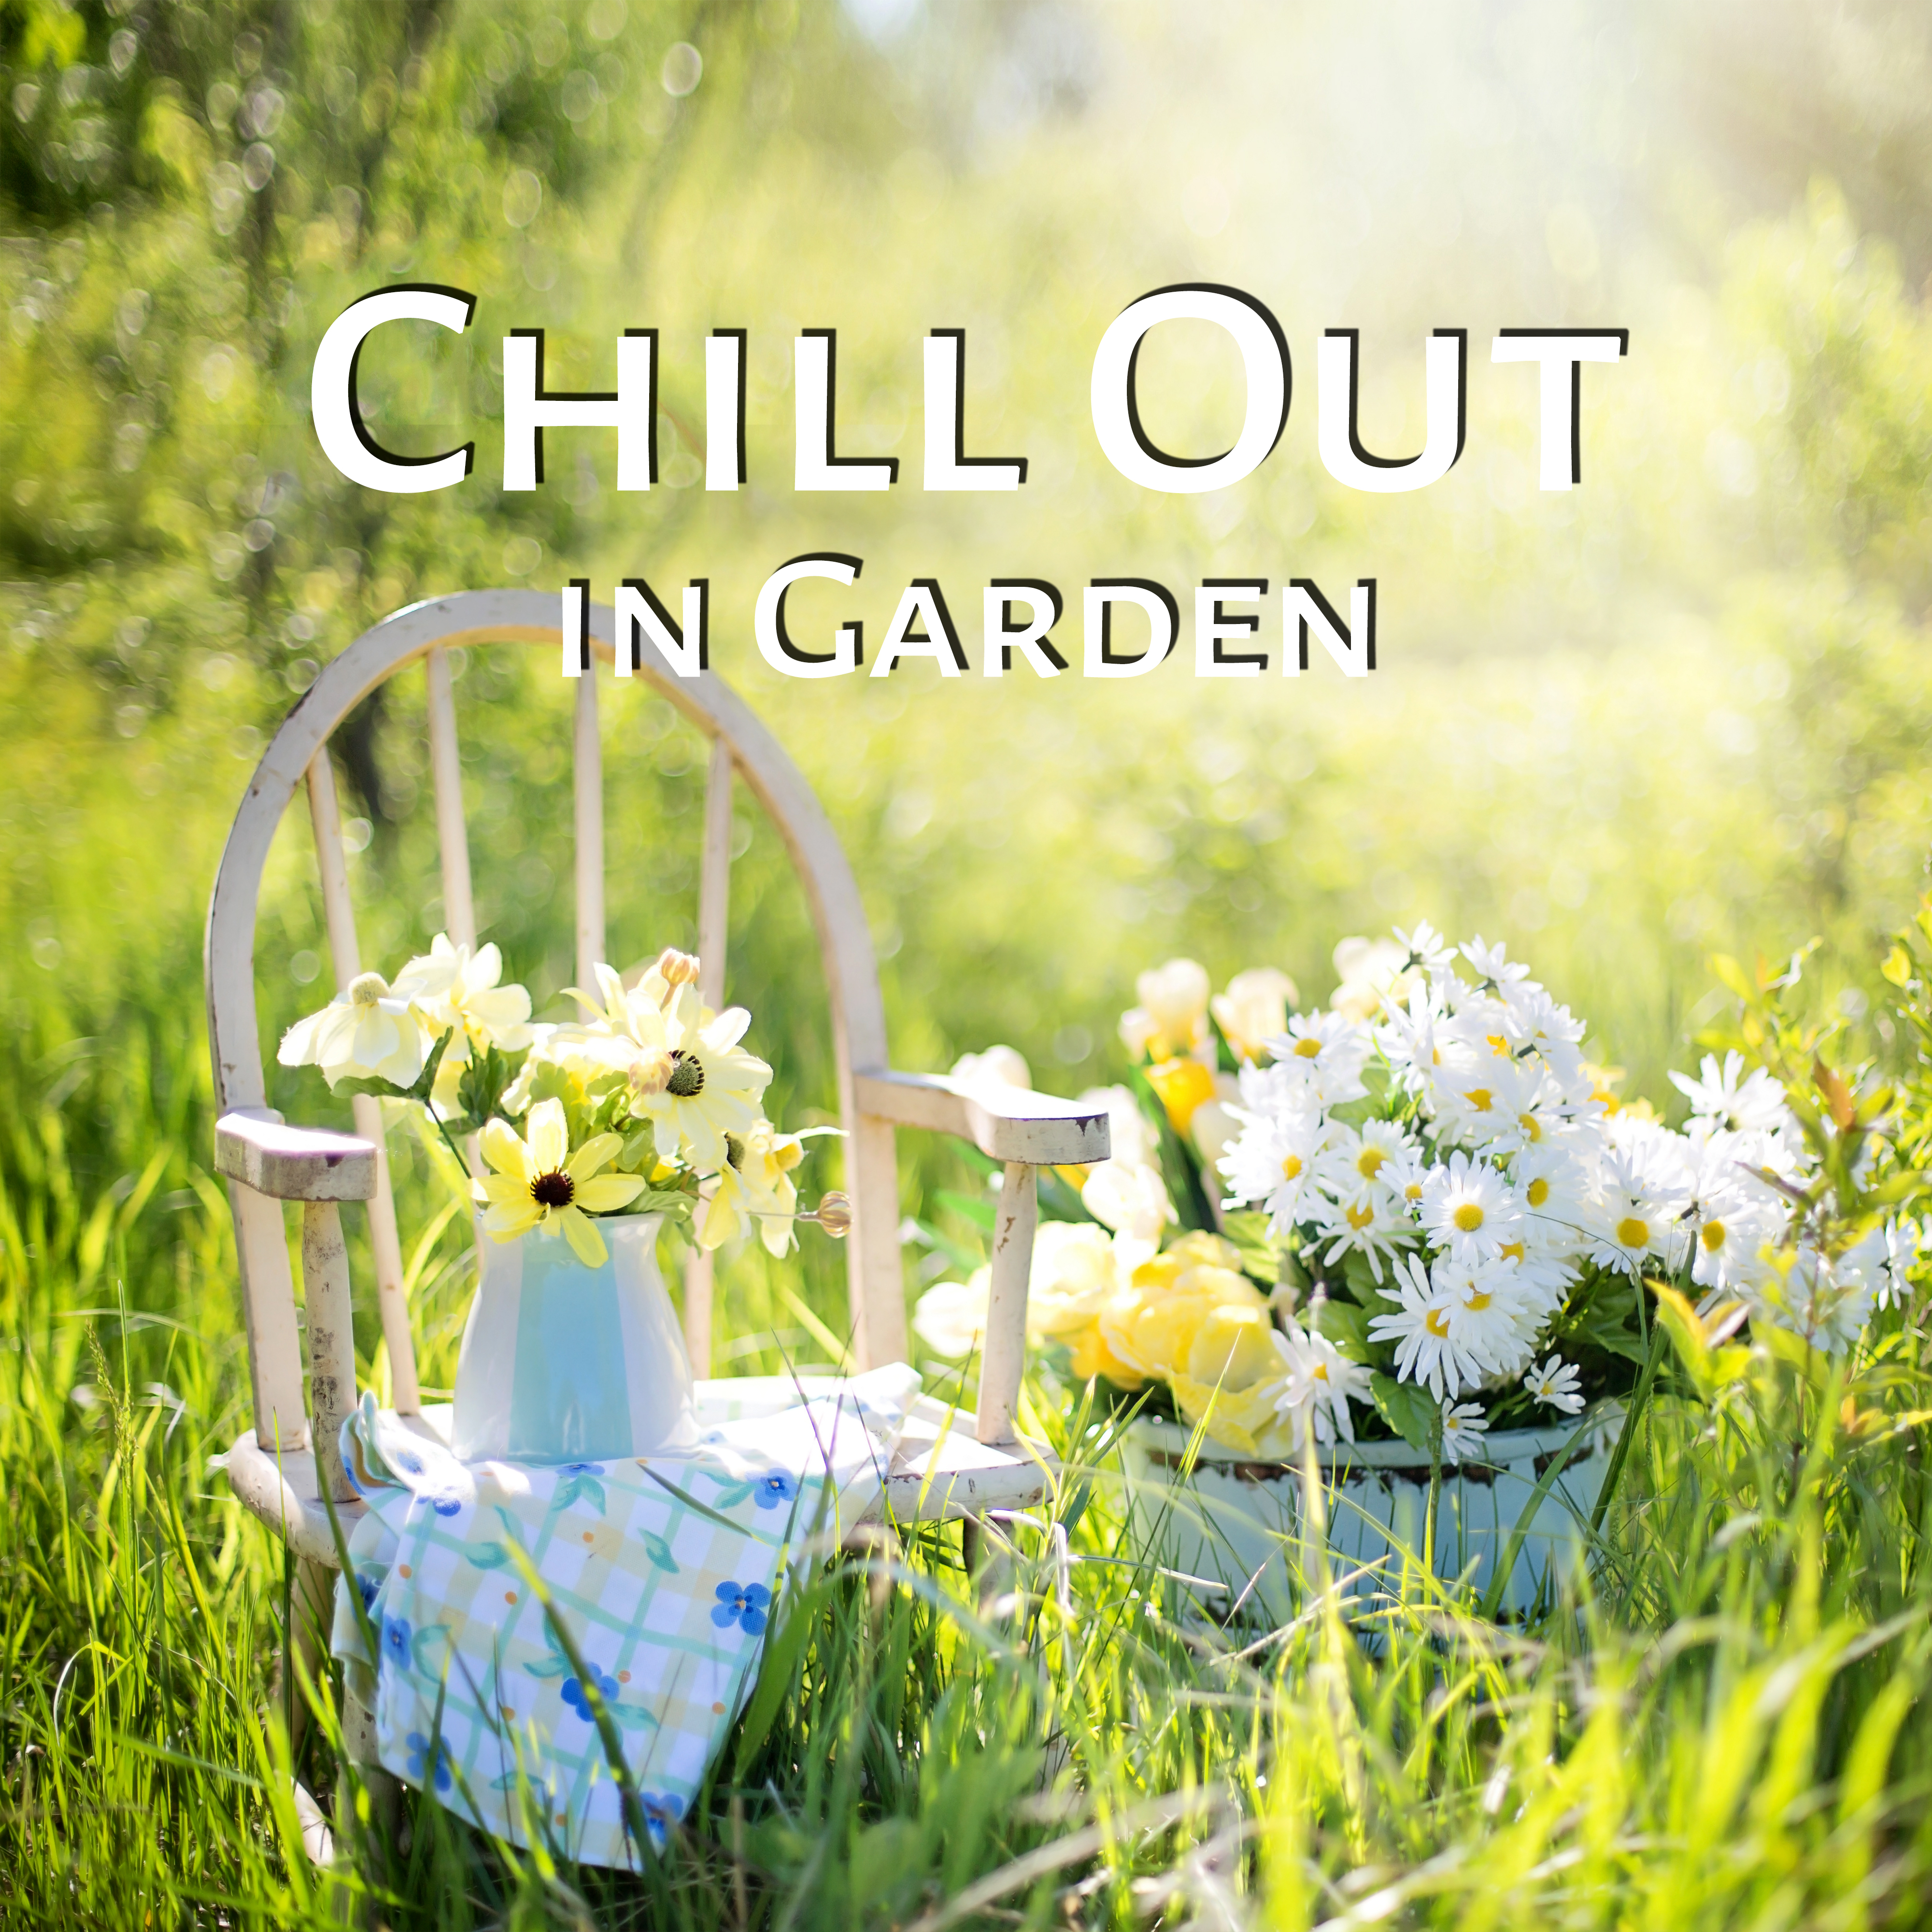 Chill Out in Garden  Electronic Music Ambient for Relaxation, Easy Listening, Positive Thinking, Chill Sounds Therapy